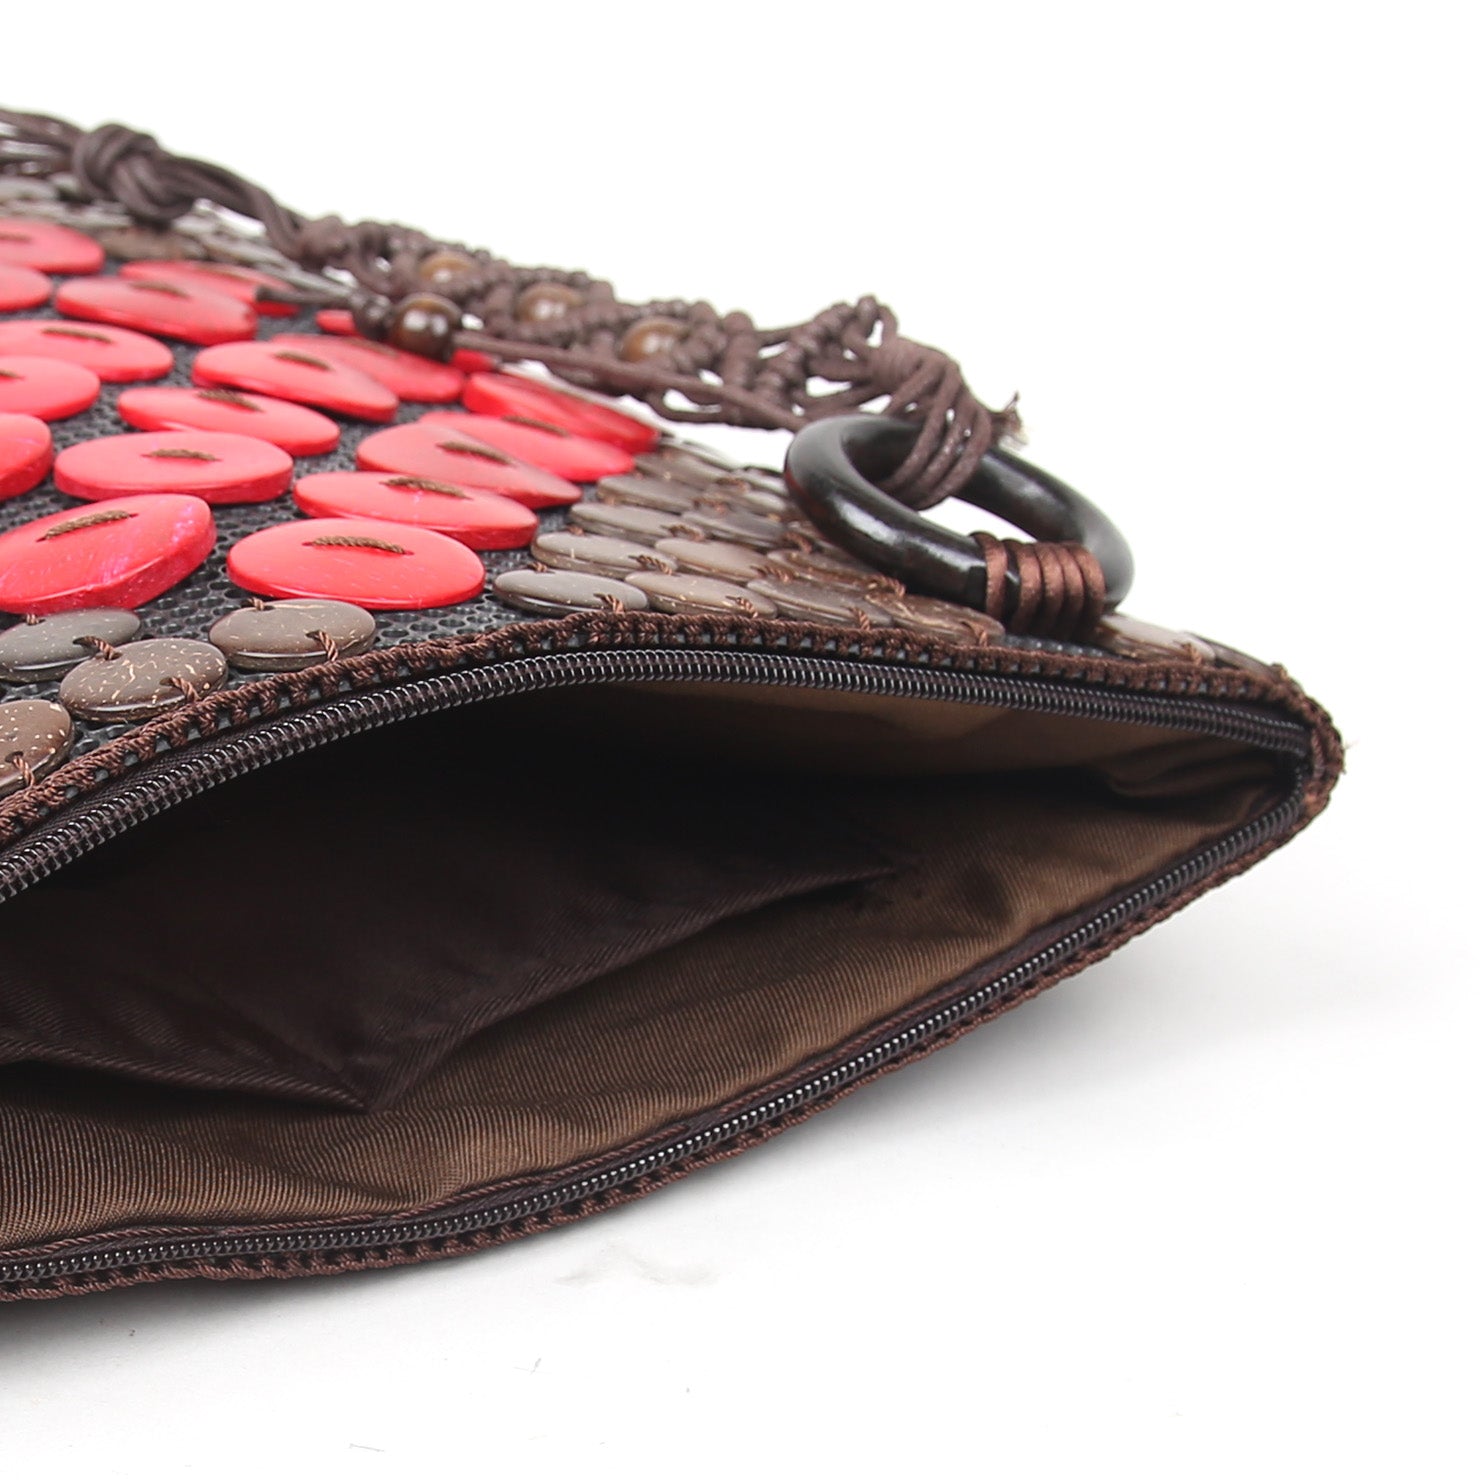 DAISYLIFE Natural and Eco-Friendly Coconut Shell Handbag - Red and Brown color 